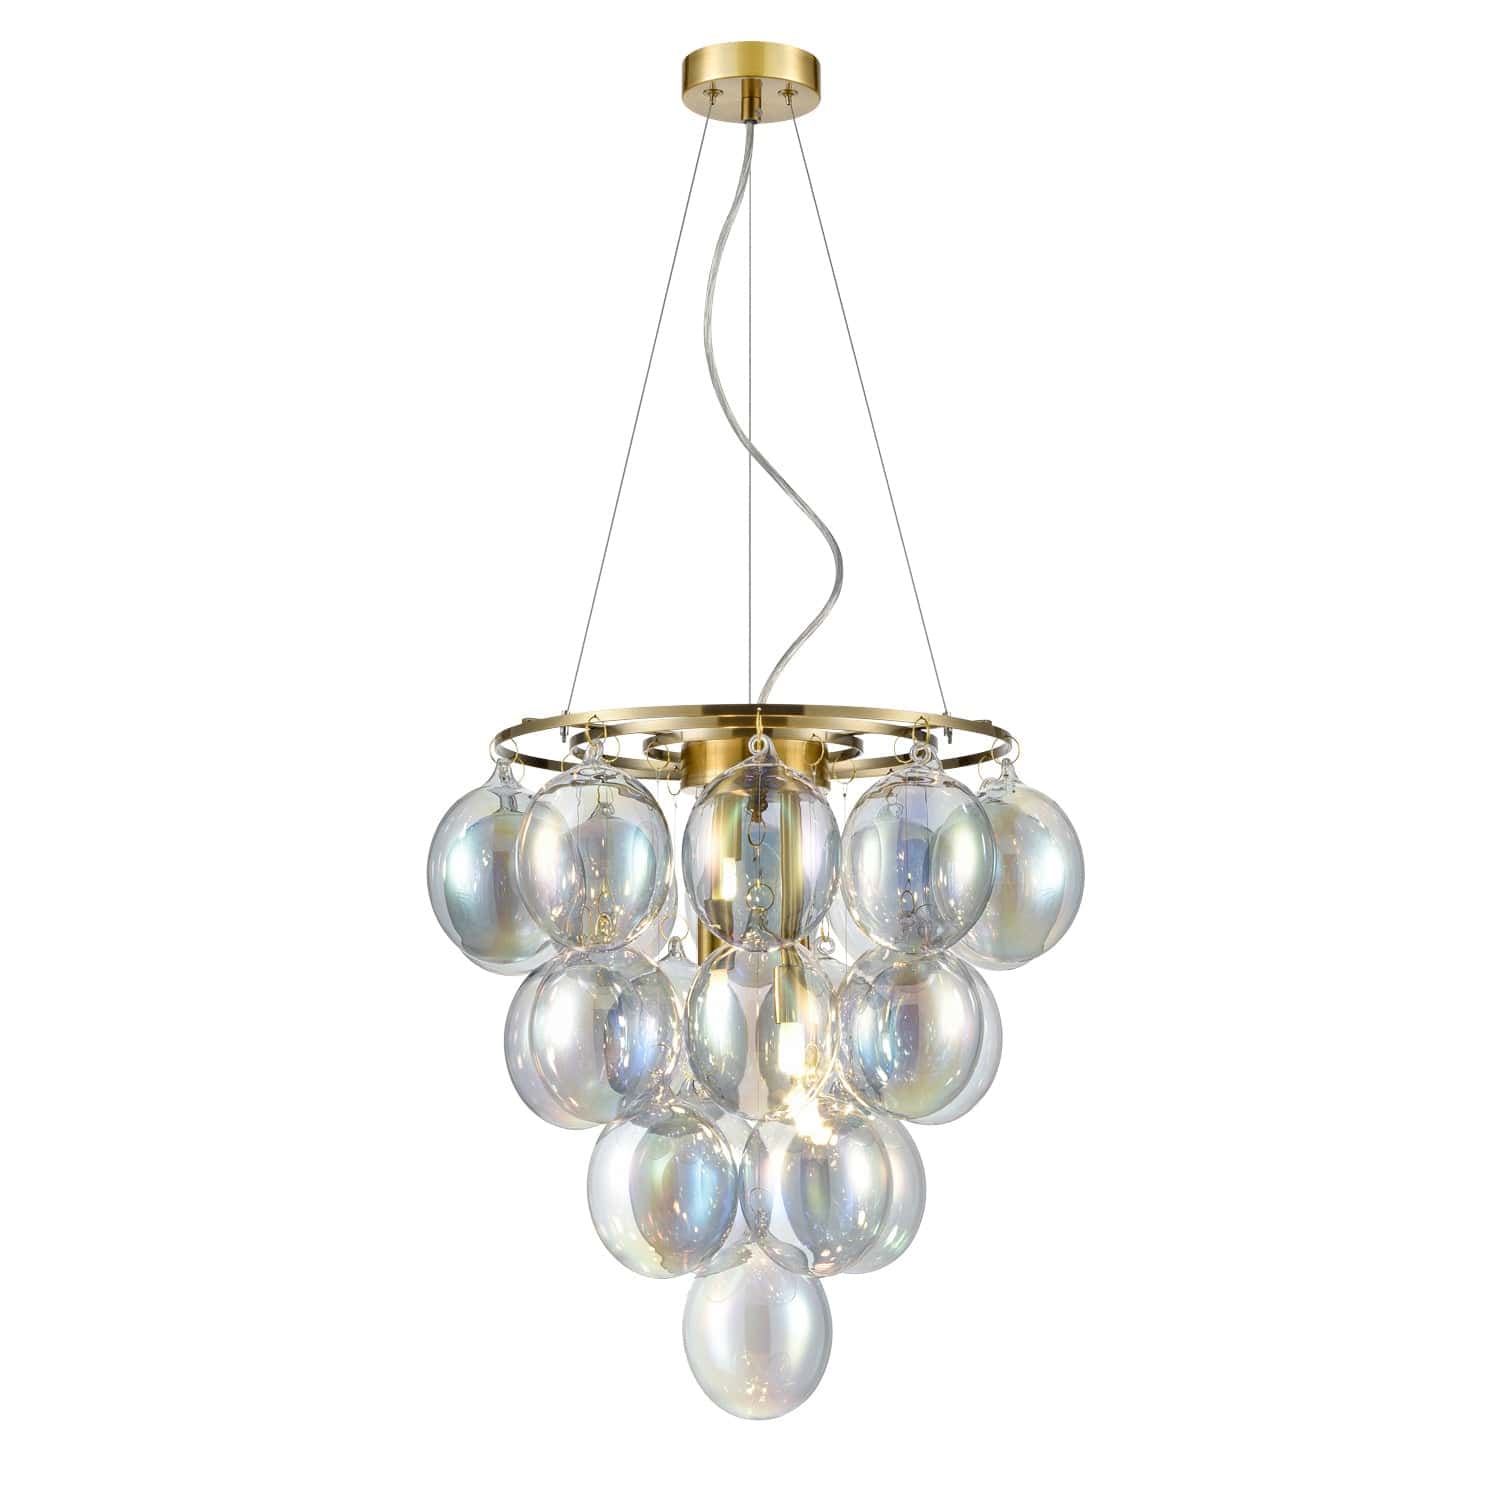 Heavenly Chandeliers Pendant lights Iridescent with brushed brass finish Orb 4 Pendant Light, iridescent or smoked glass